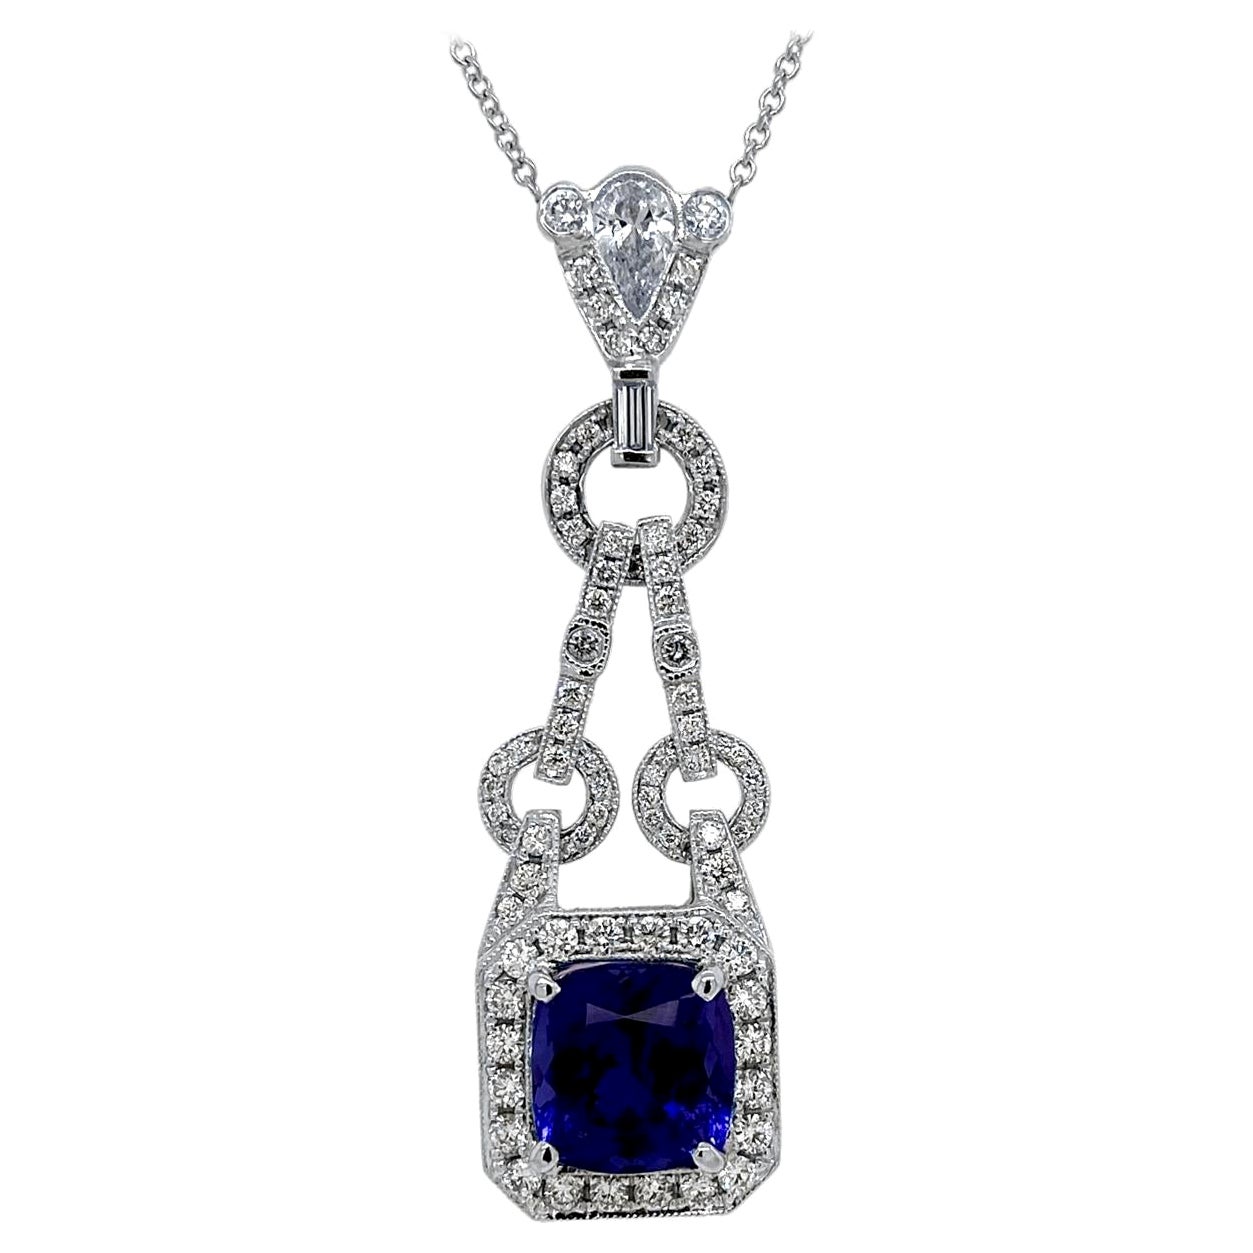 5.62 Carat Cushion Shape Tanzanite Necklace with 1.40 Carat Diamonds on the Side For Sale